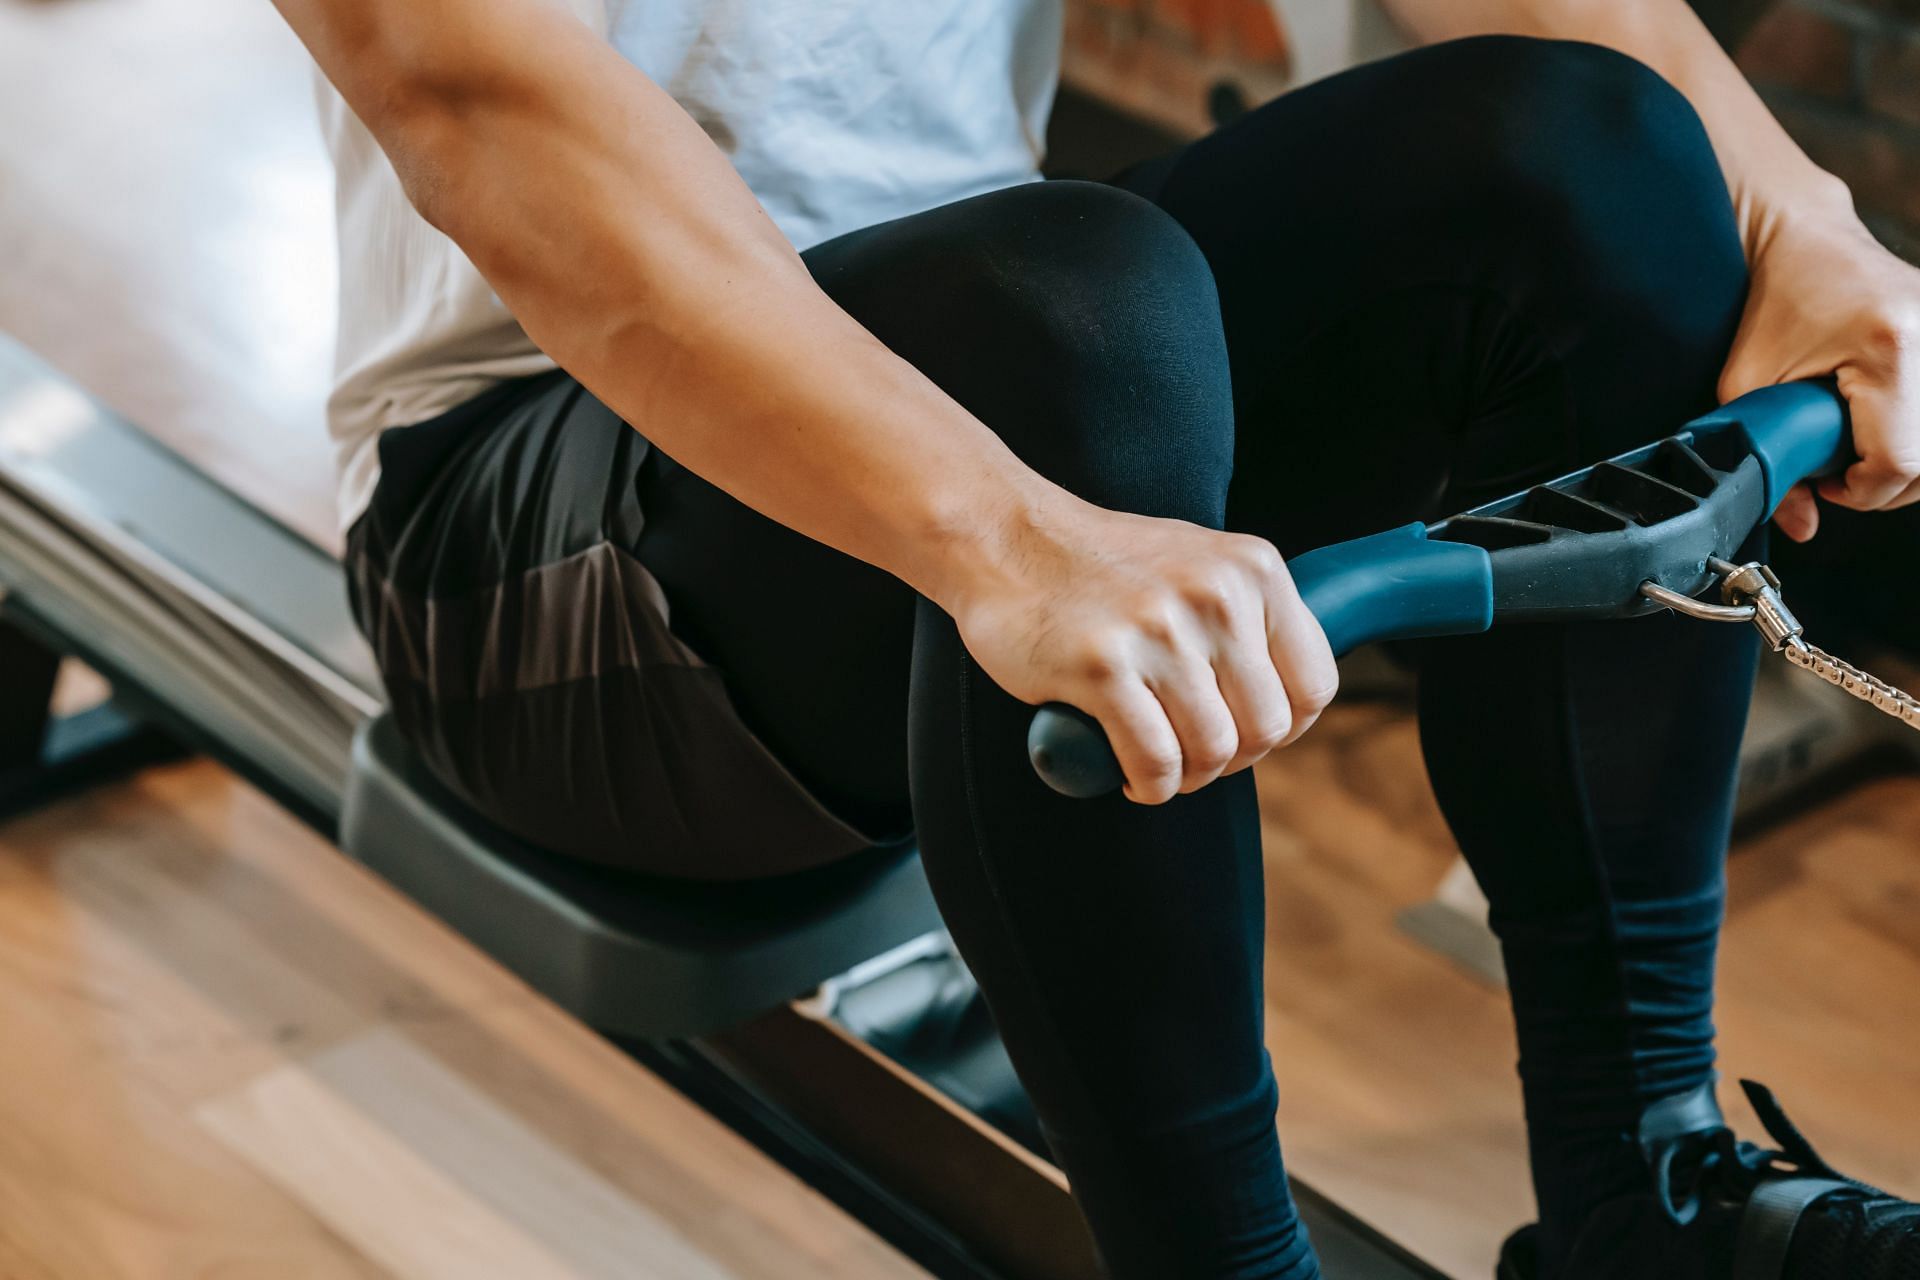 Rowing is an effective, low-impact workout that can be quite fun to do. (Image via Pexels/Andres Ayrton)